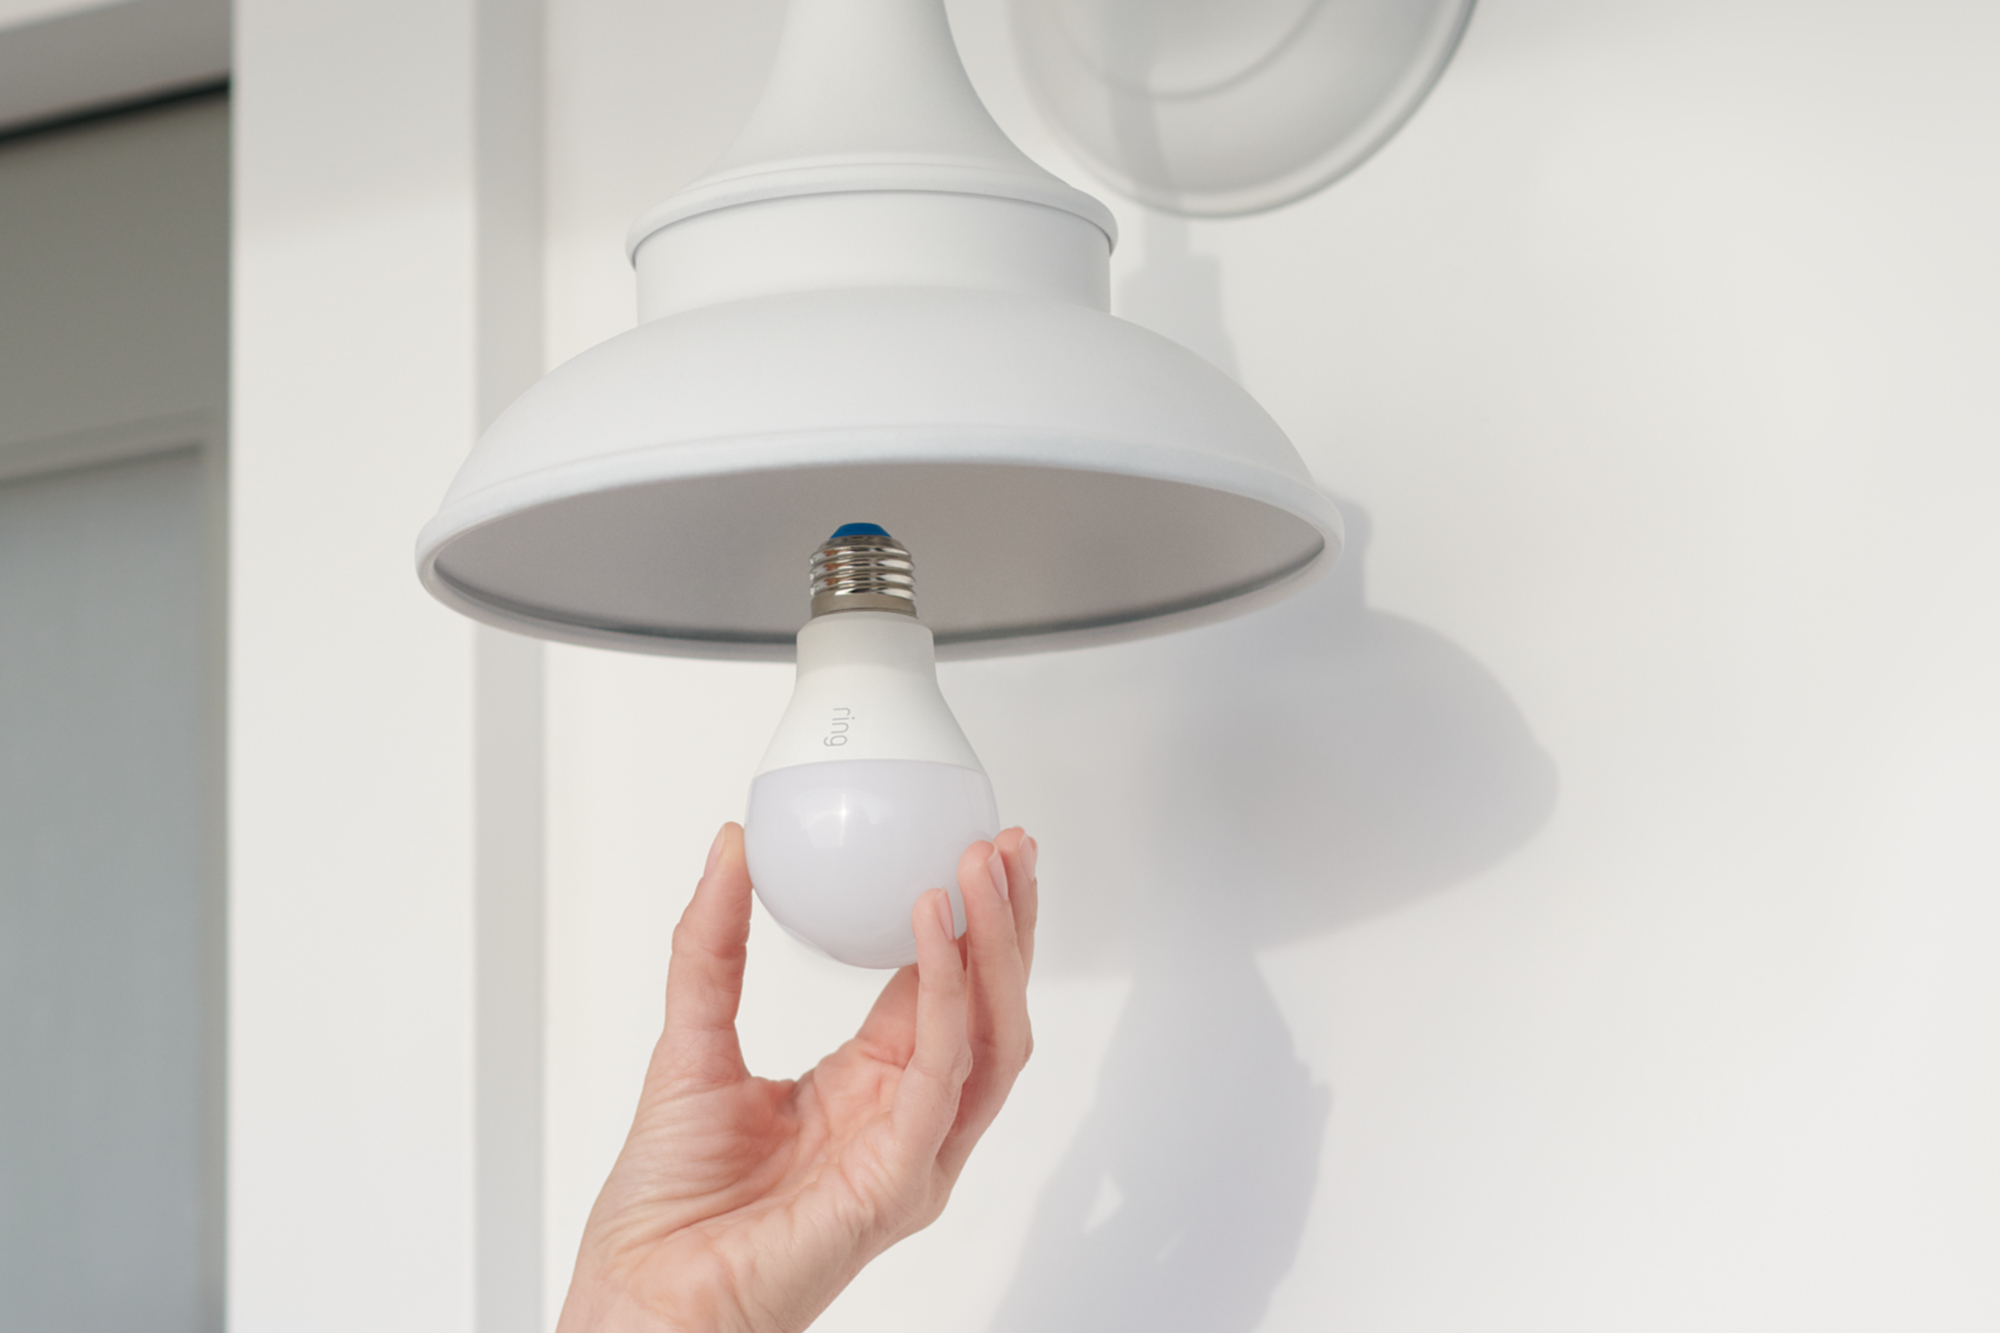 How To Save Money With Smart Lights